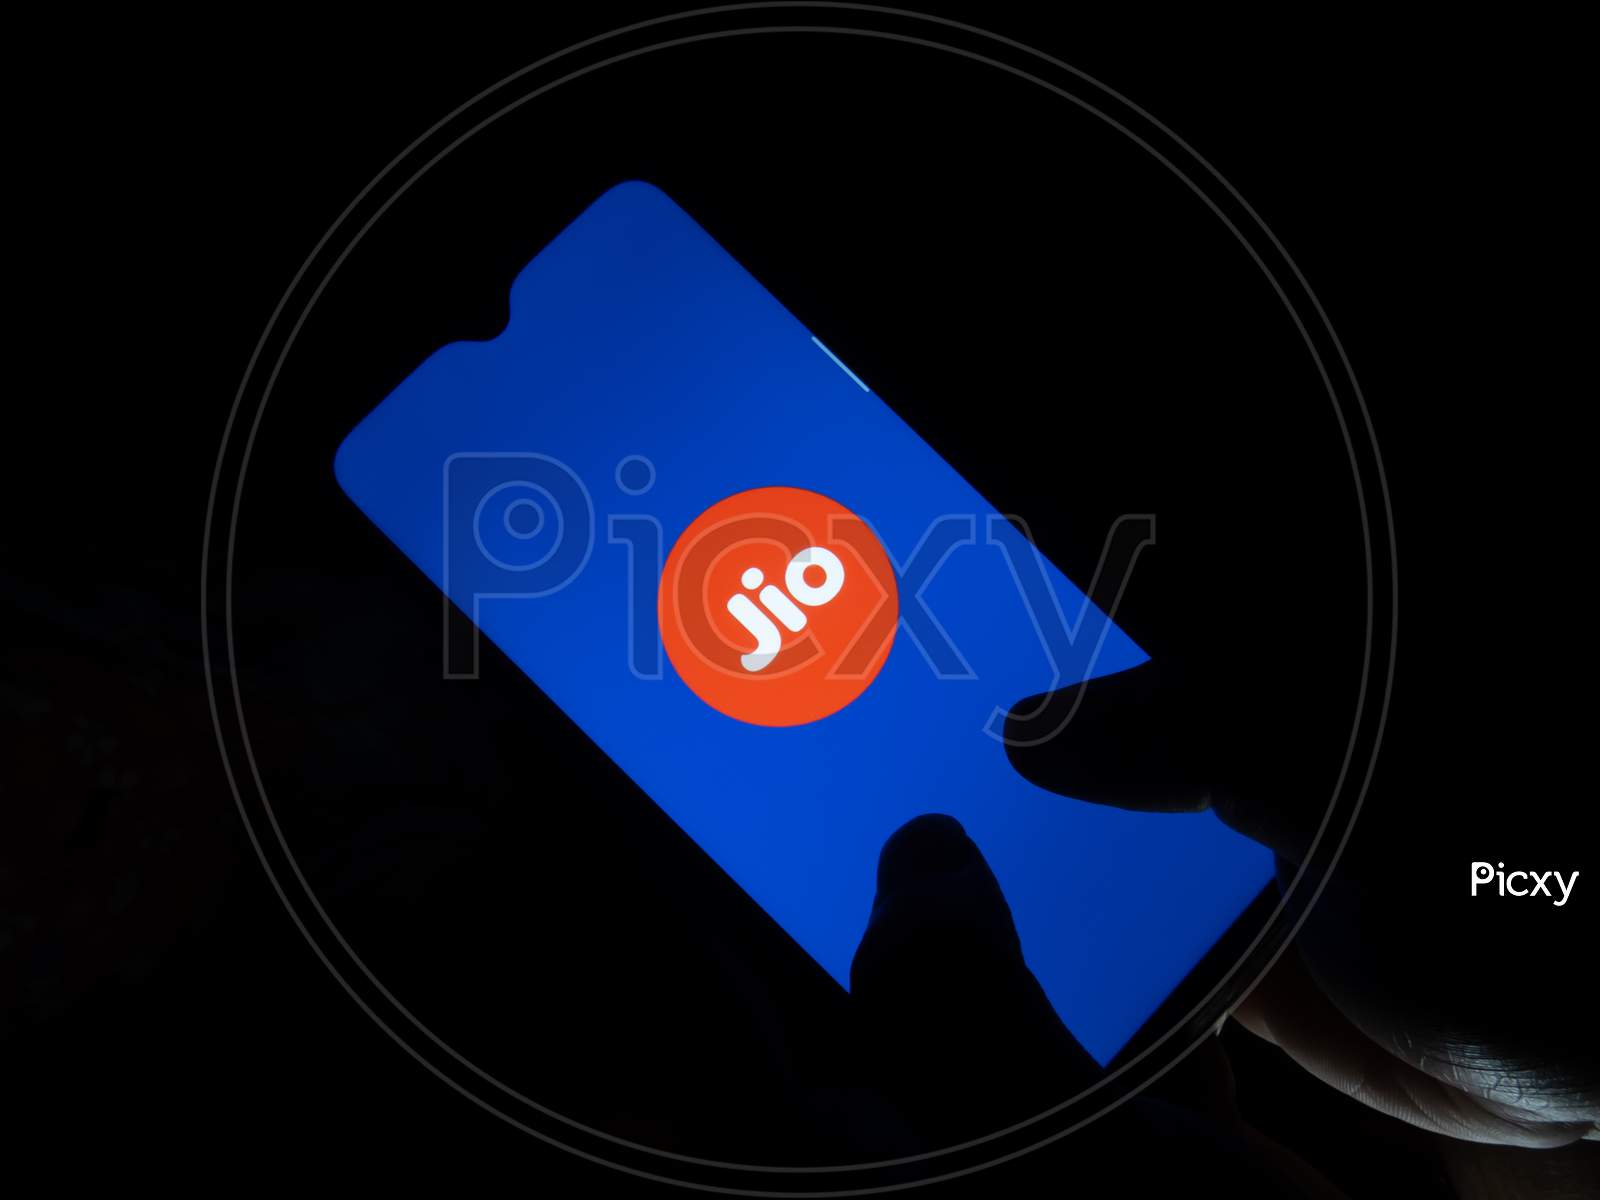 Jio App Or Icon On The Mobile Screen.